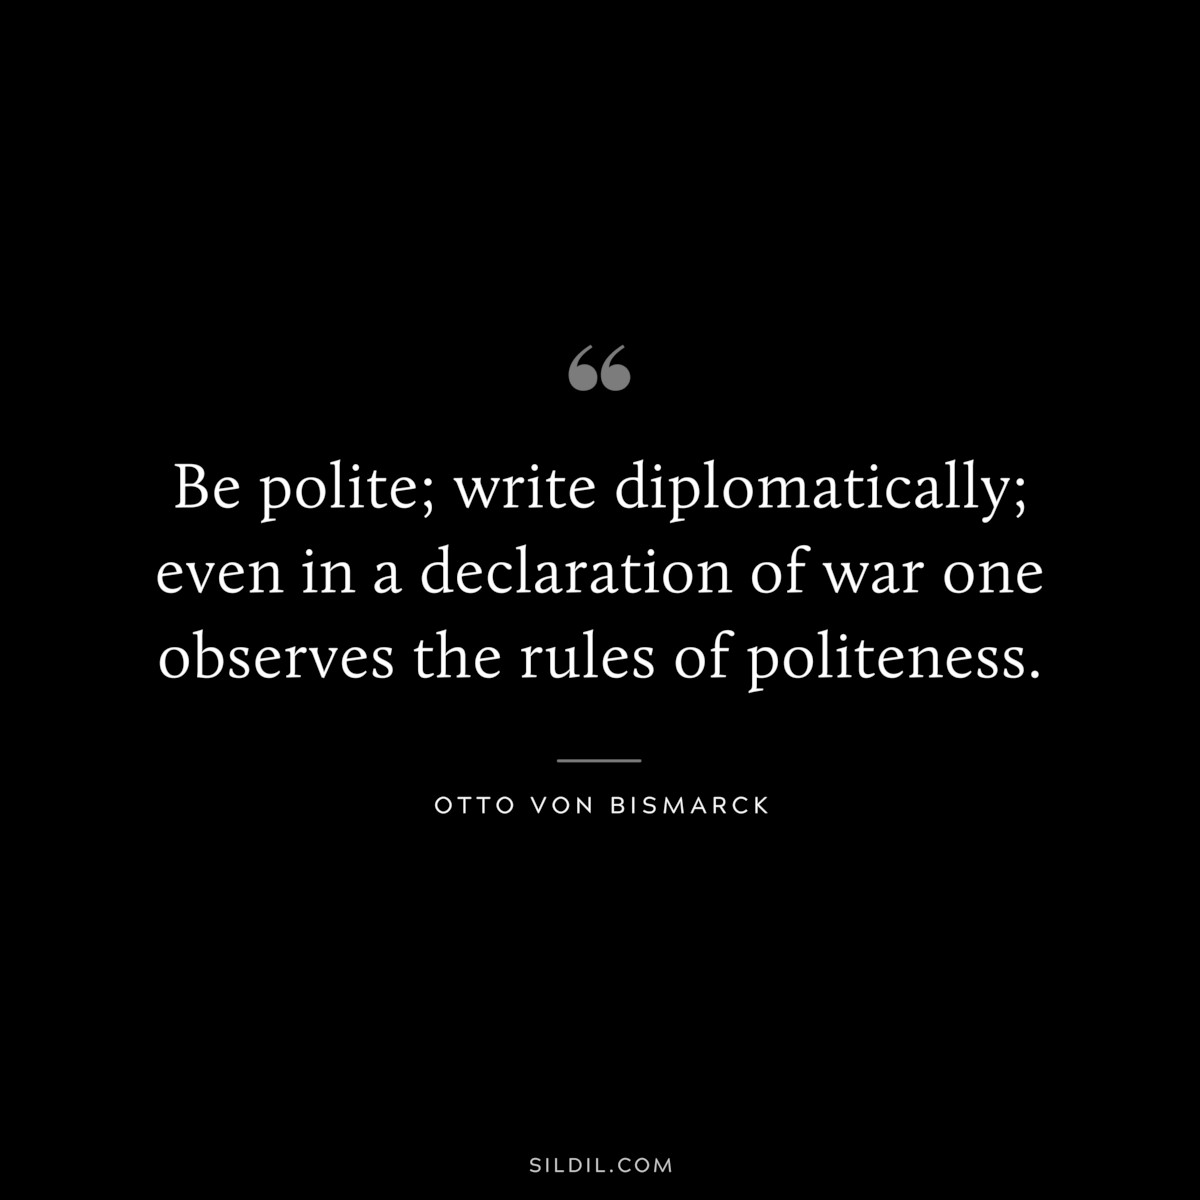 Be polite; write diplomatically; even in a declaration of war one observes the rules of politeness. ― Otto von Bismarck